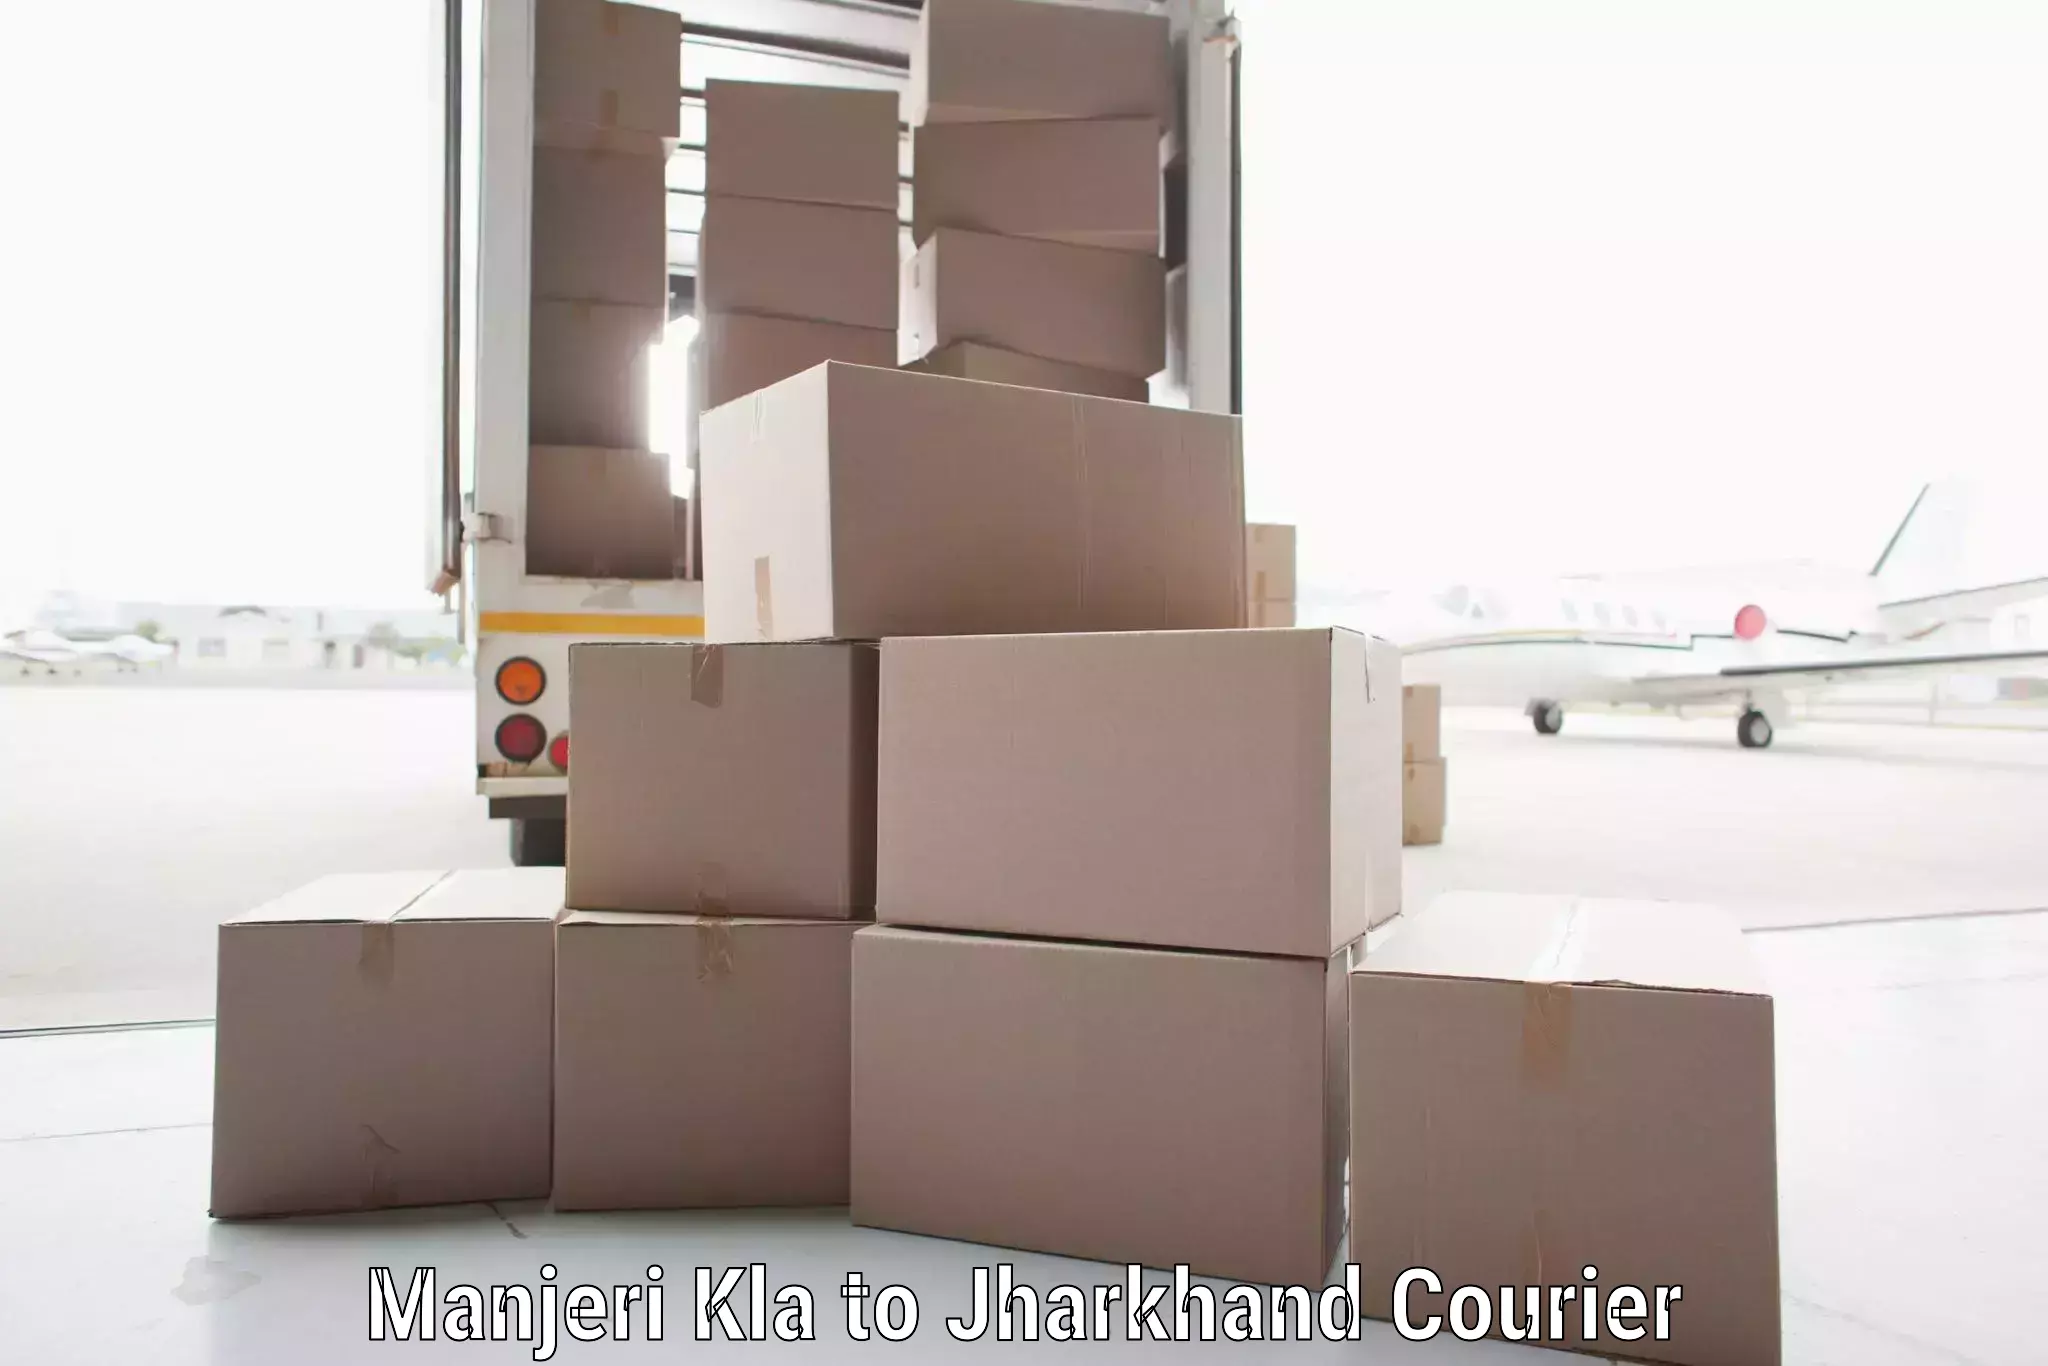 Corporate courier solutions Manjeri Kla to Jharkhand